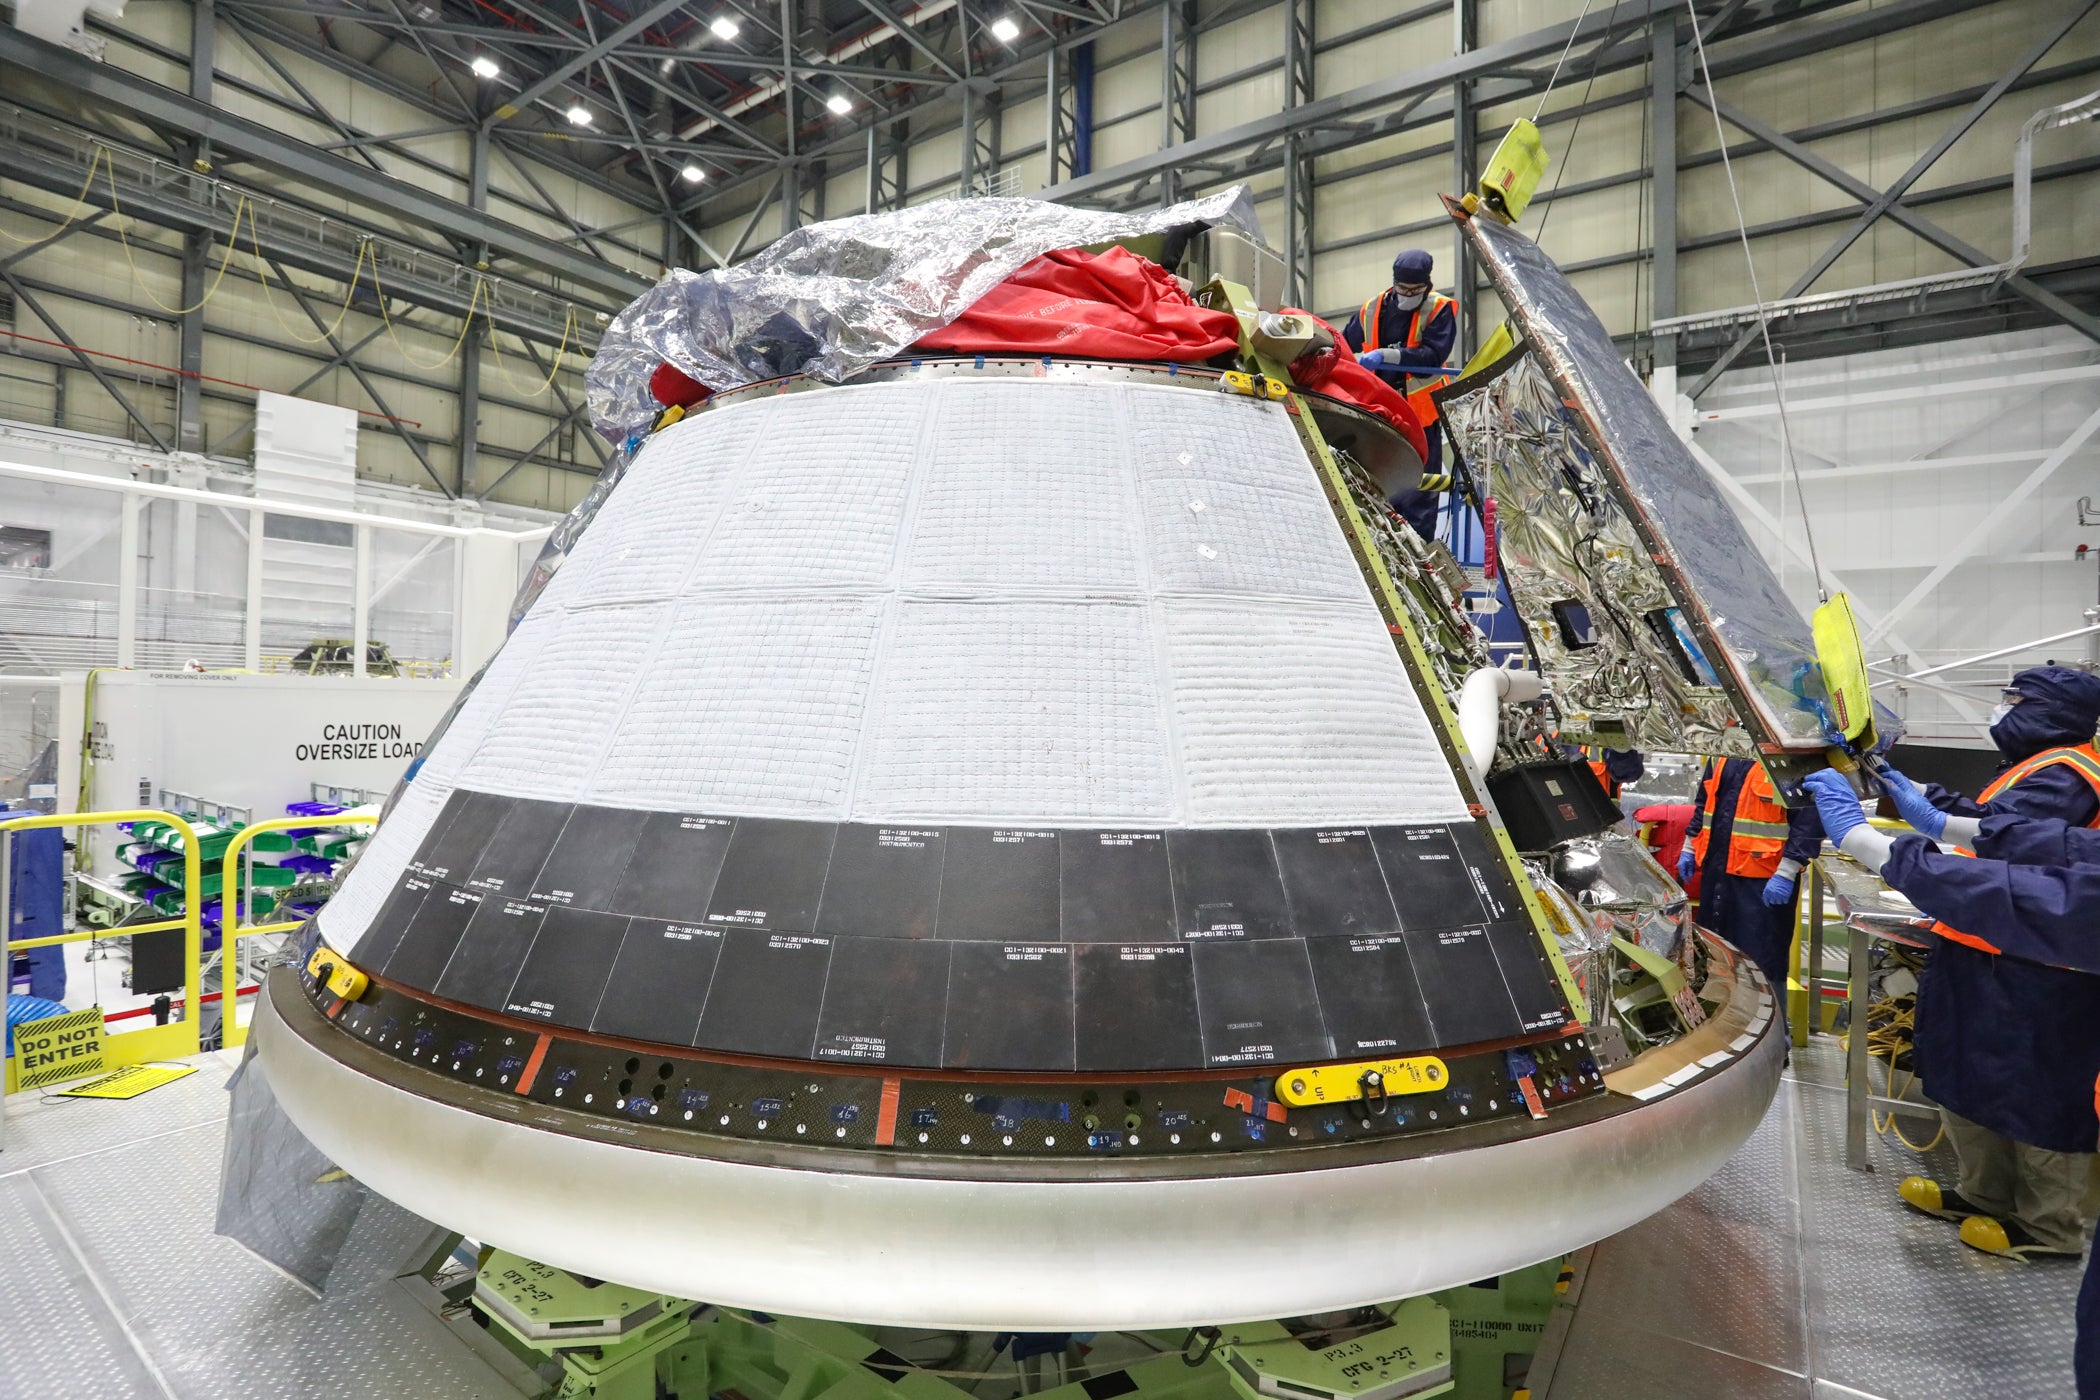 Technicians add panels to the Boeing Starliner spacecraft at Kennedy Space Center ahead of an Orbital test flight scheduled for May